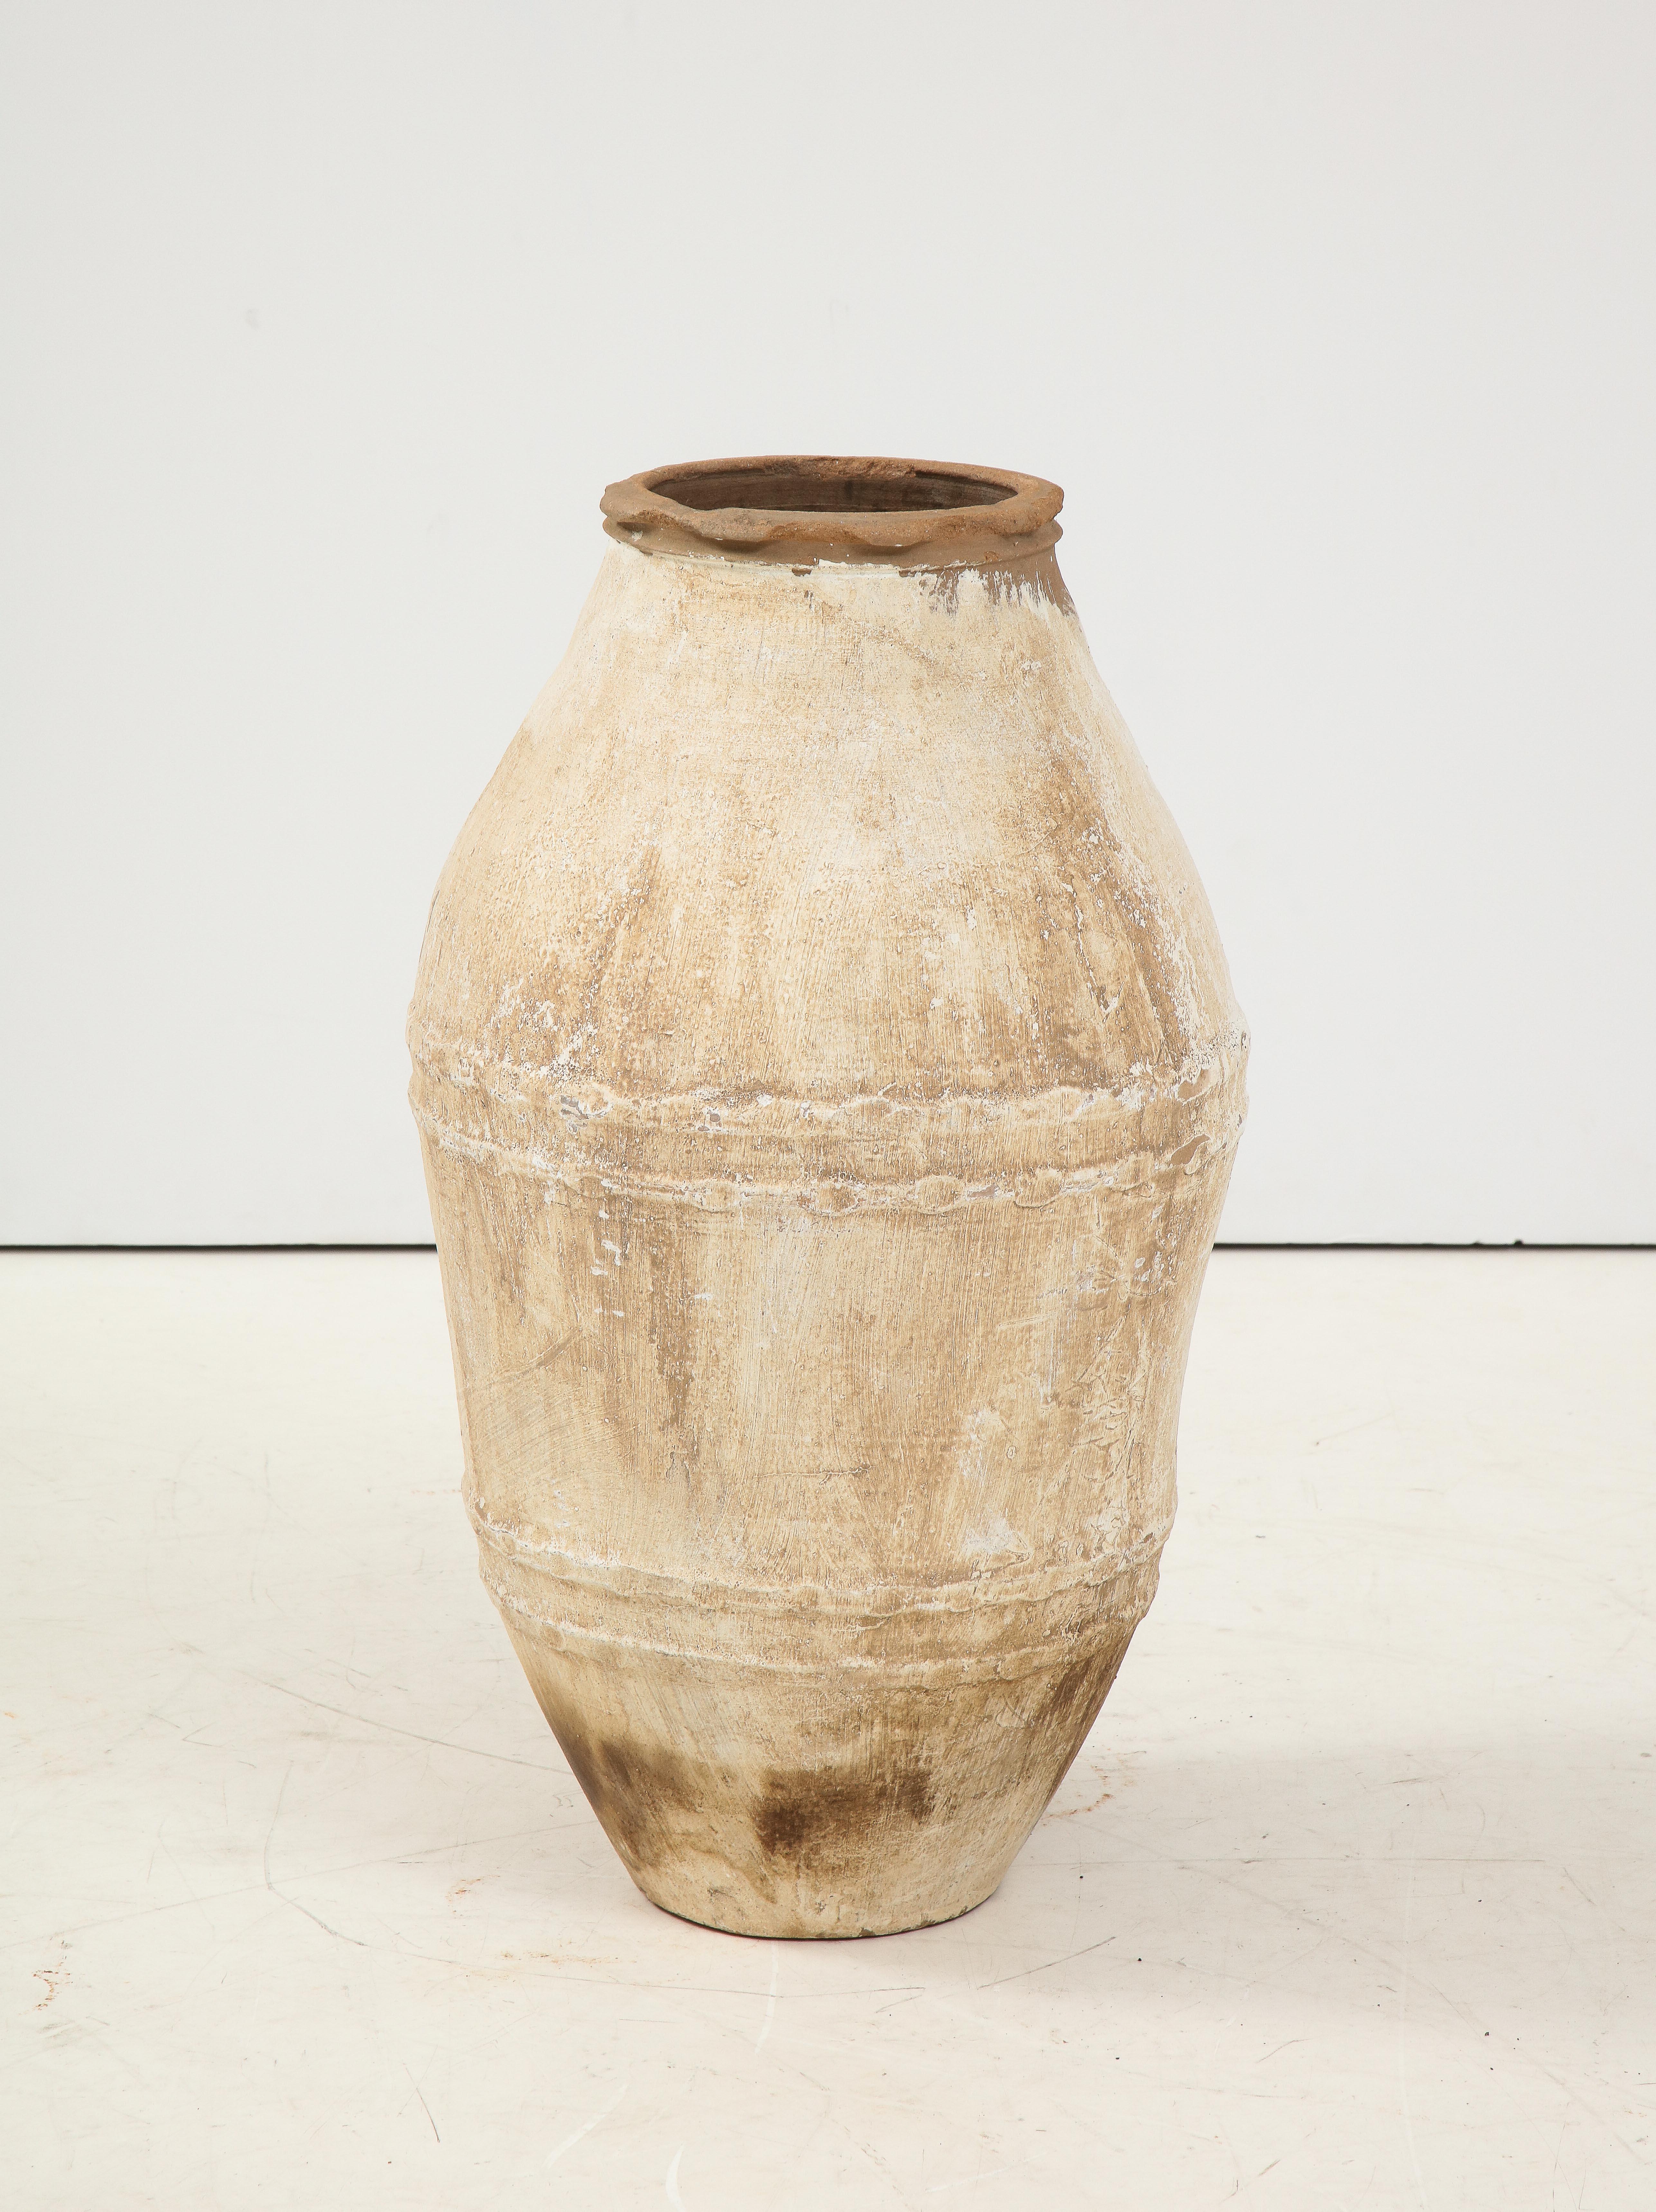 An Italian antique terracotta olive oil jar in white painted finish; with a beautifully aged patina and the natural terracotta showing through. These jars were historically used to transport olive oil in the Mediterranean region during the 18th thru